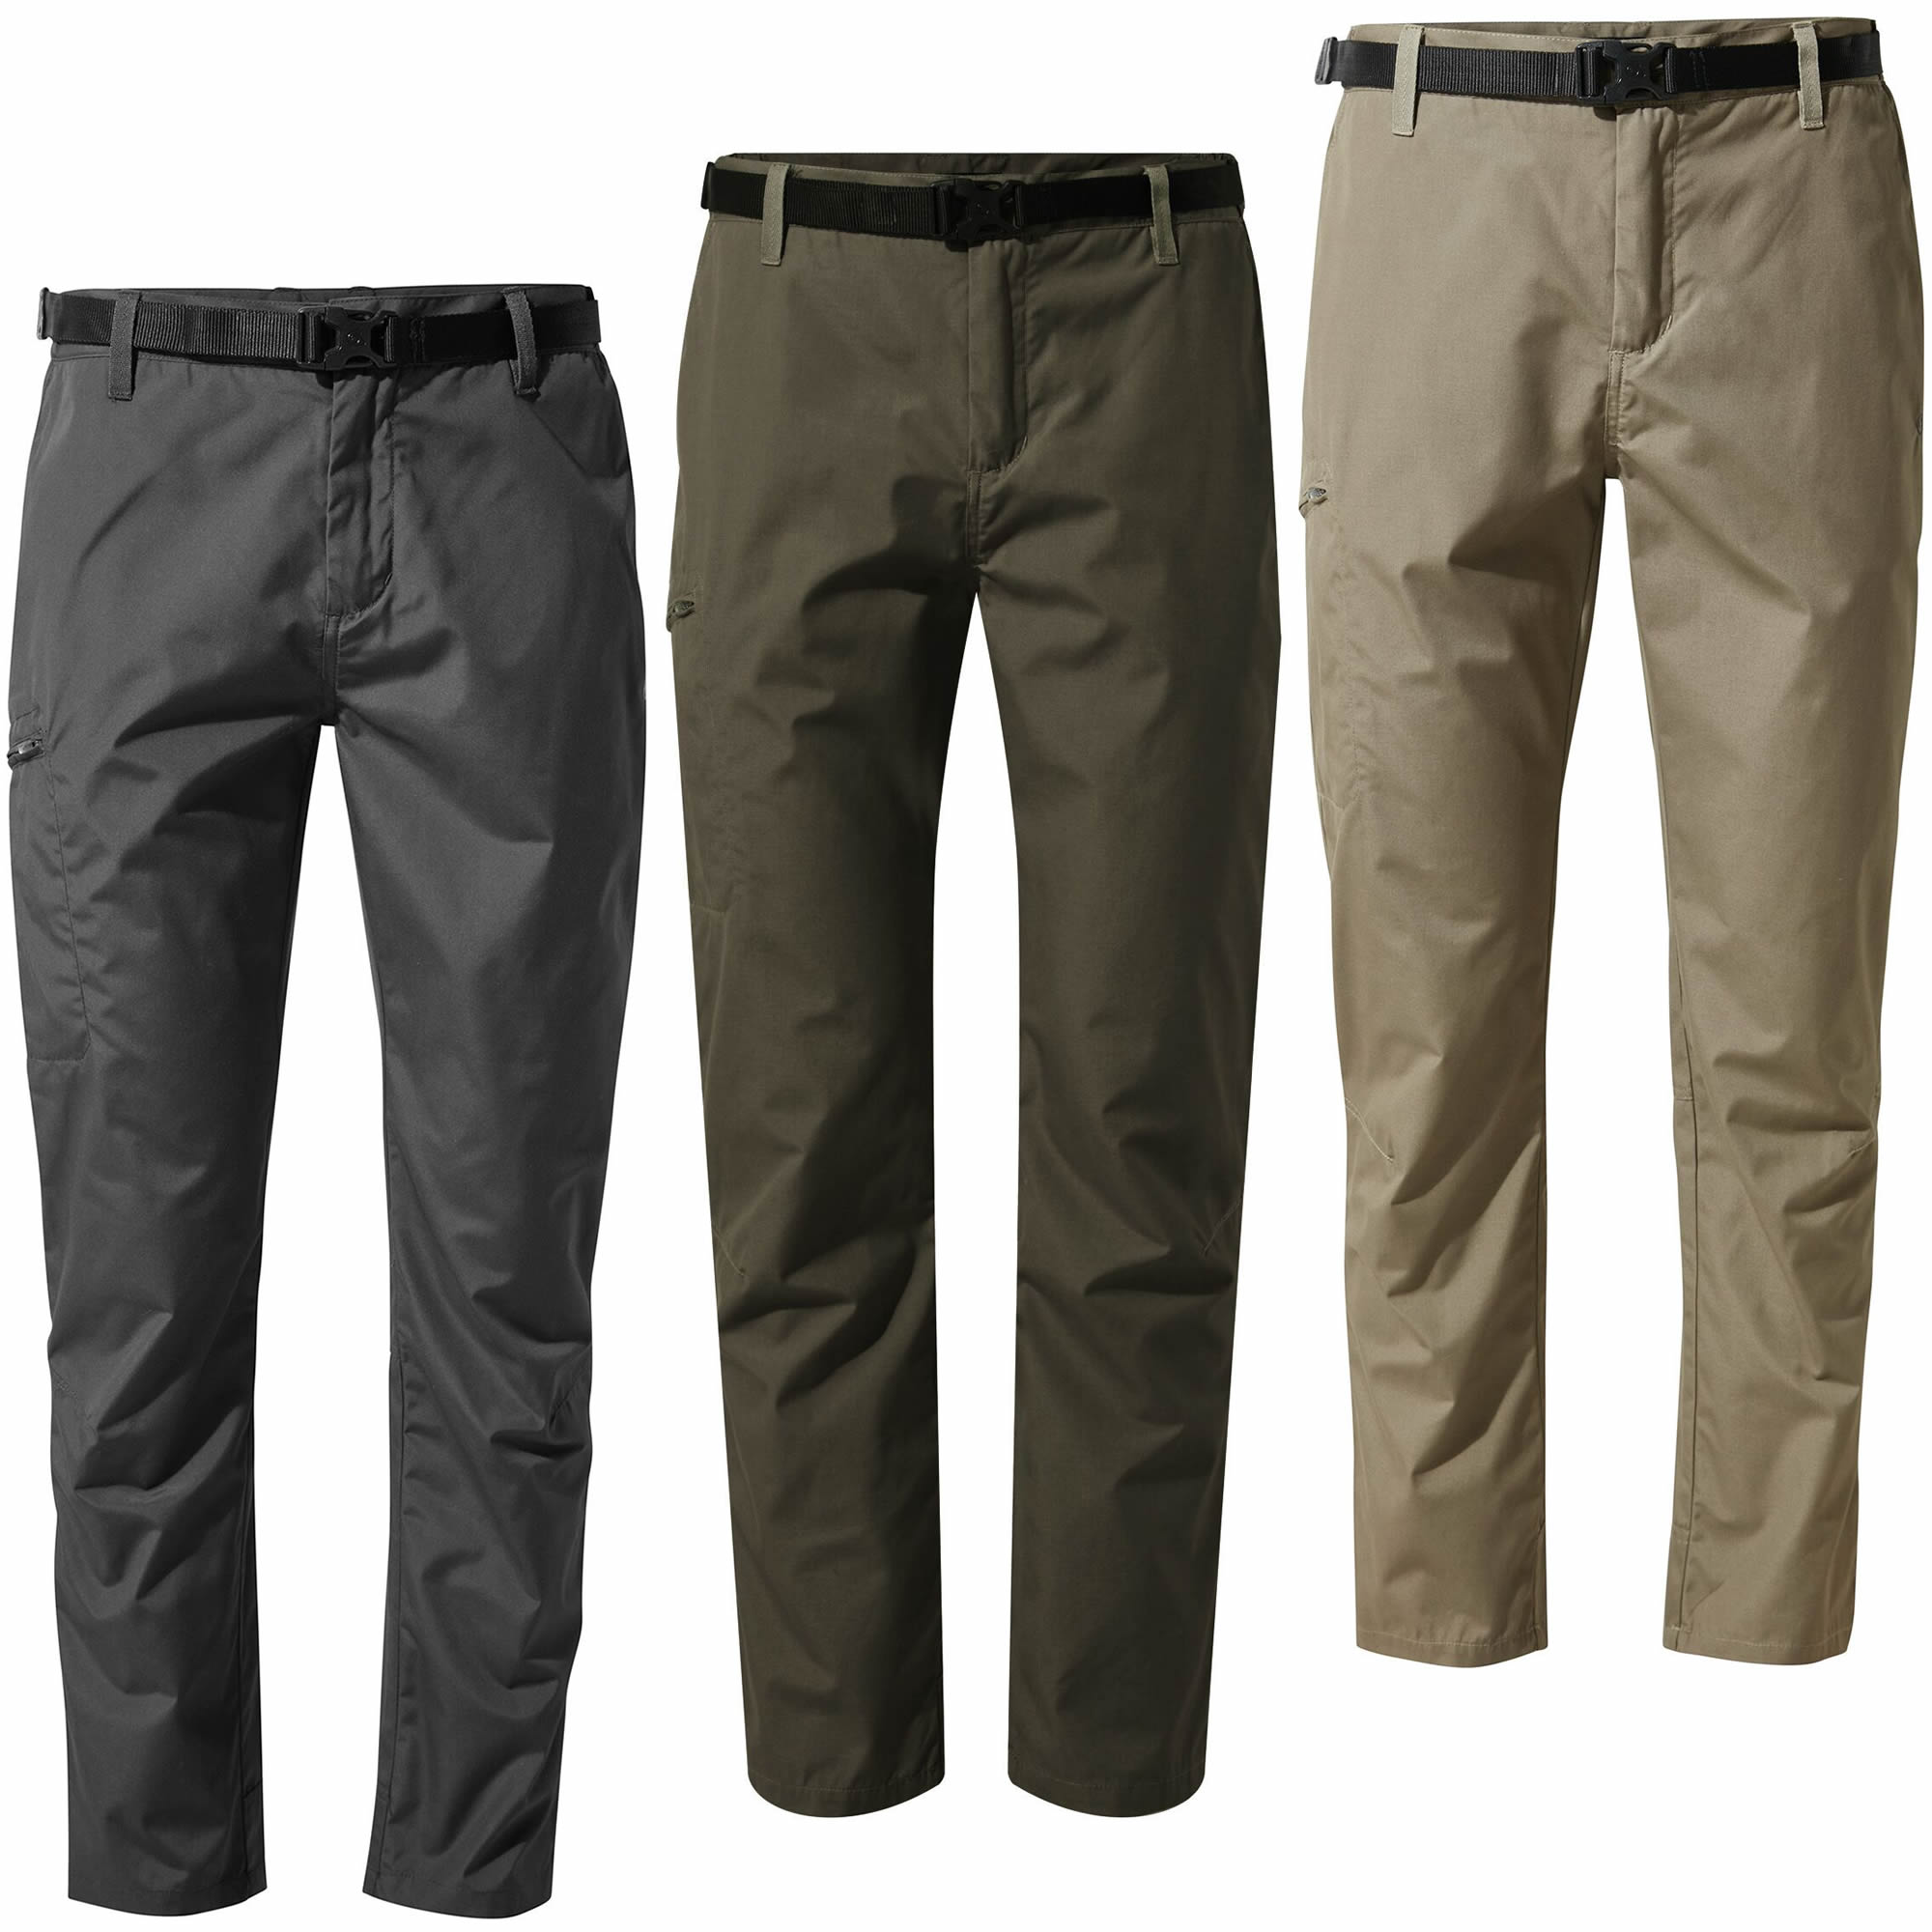 Womens Waterproof Trousers  Portwest  The Outdoor Shop